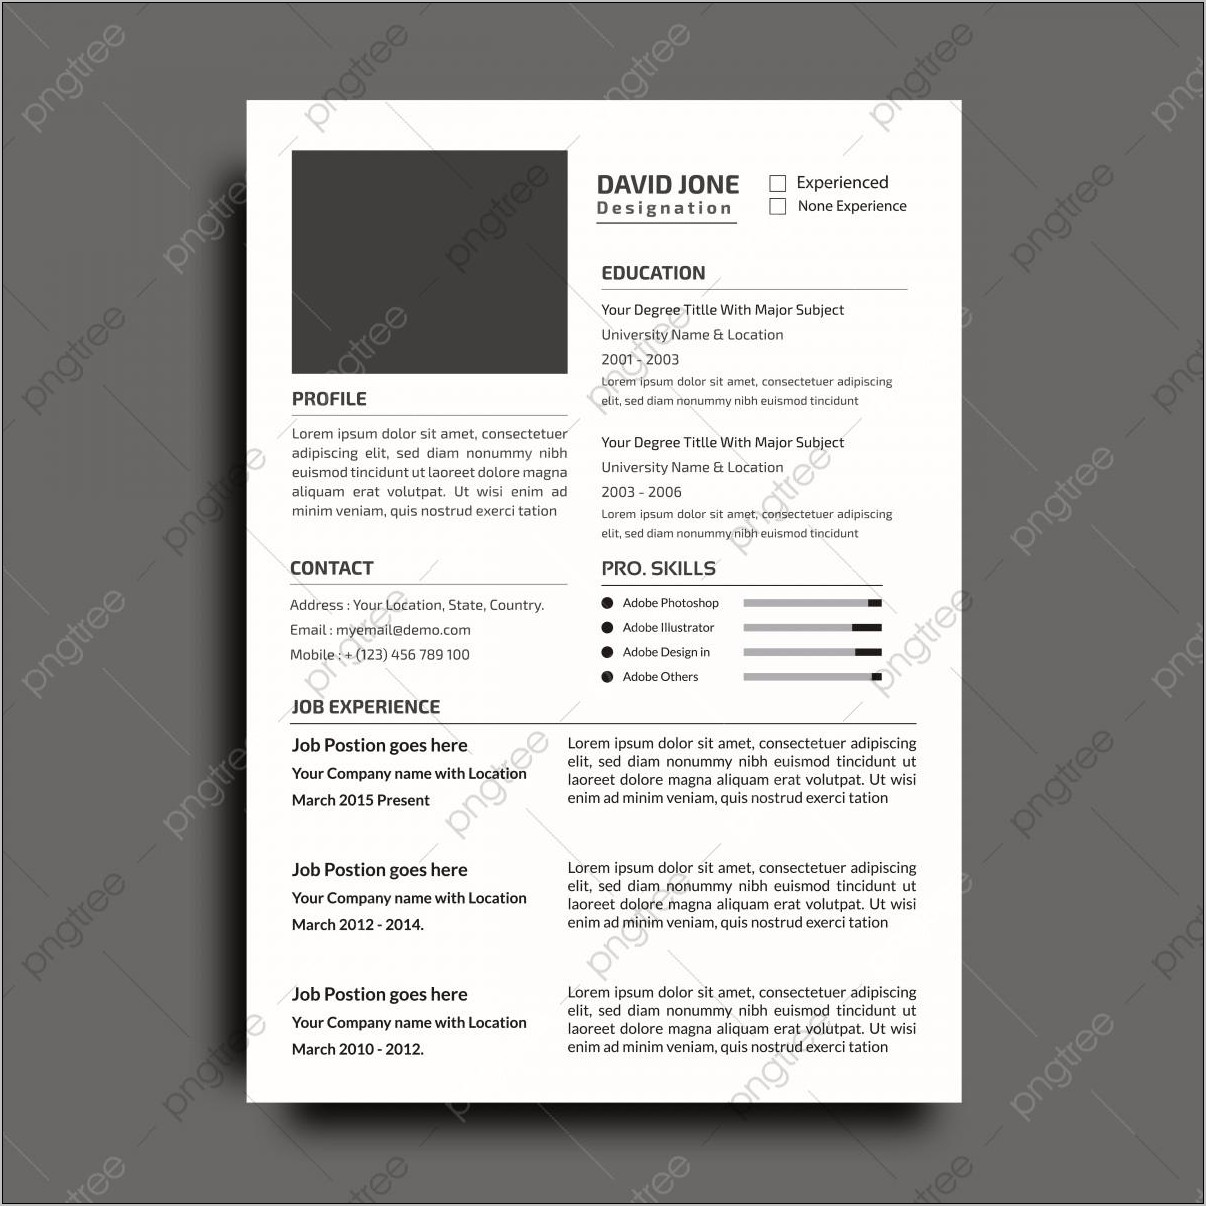 Designed Resume Template Free Download